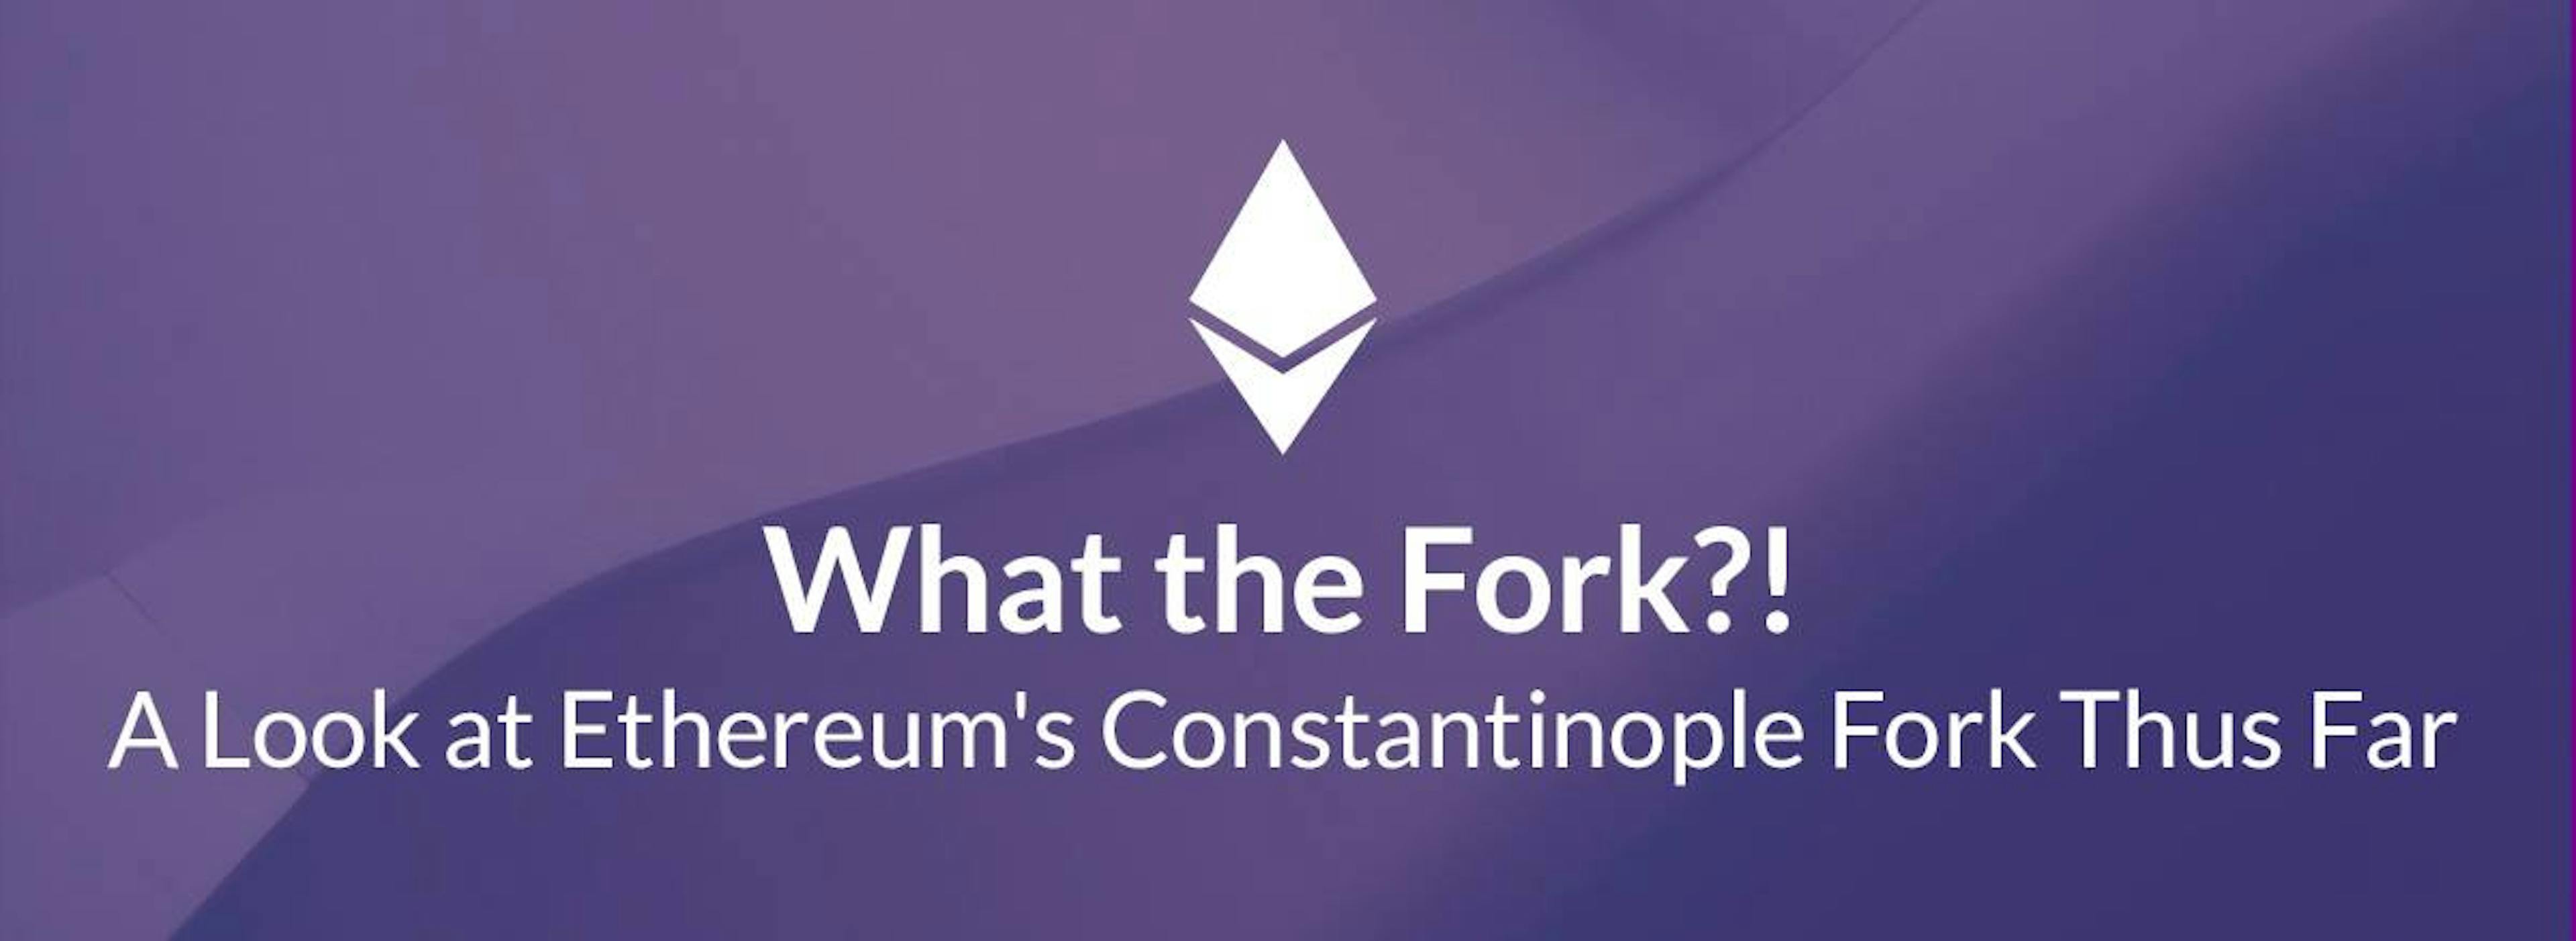 /what-the-fork-a-look-at-ethereums-constantinople-fork-thus-far-bbd963c768ca feature image